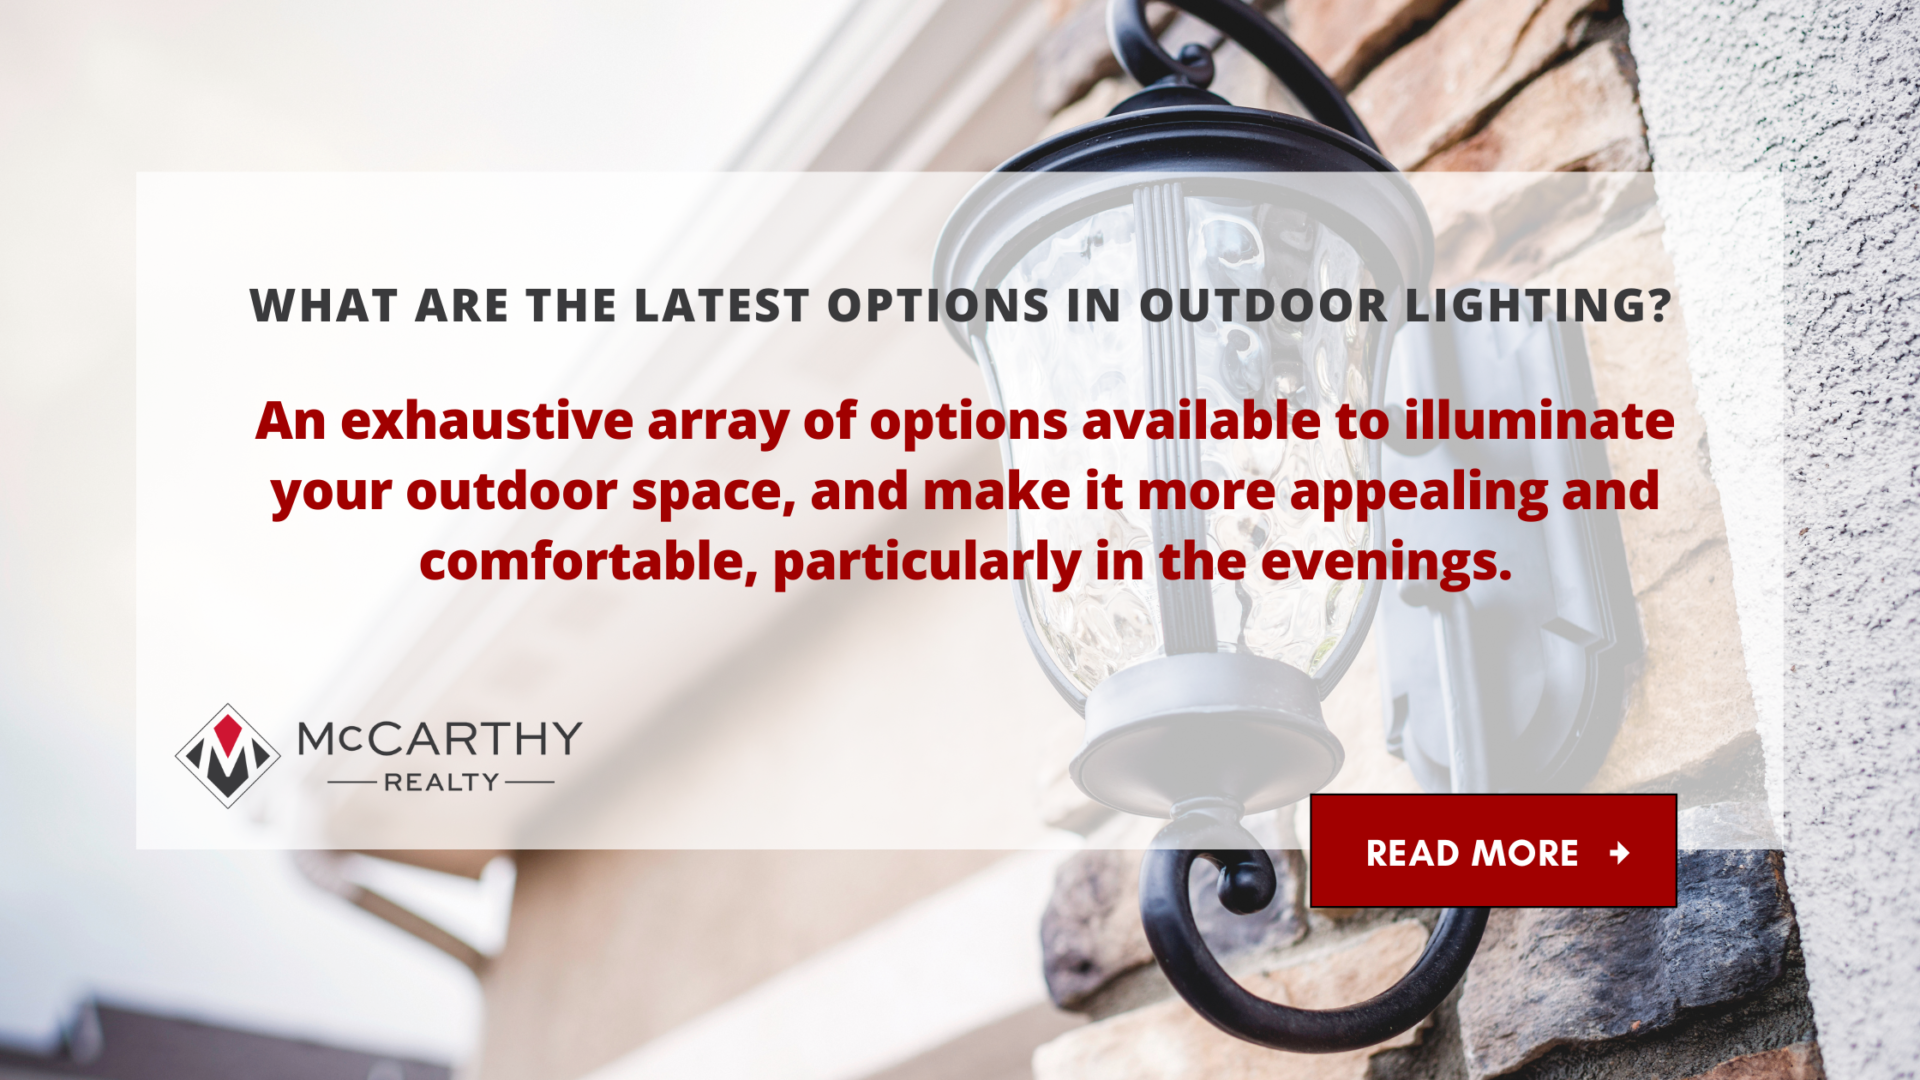 What Are The Latest Options in Outdoor Lighting?